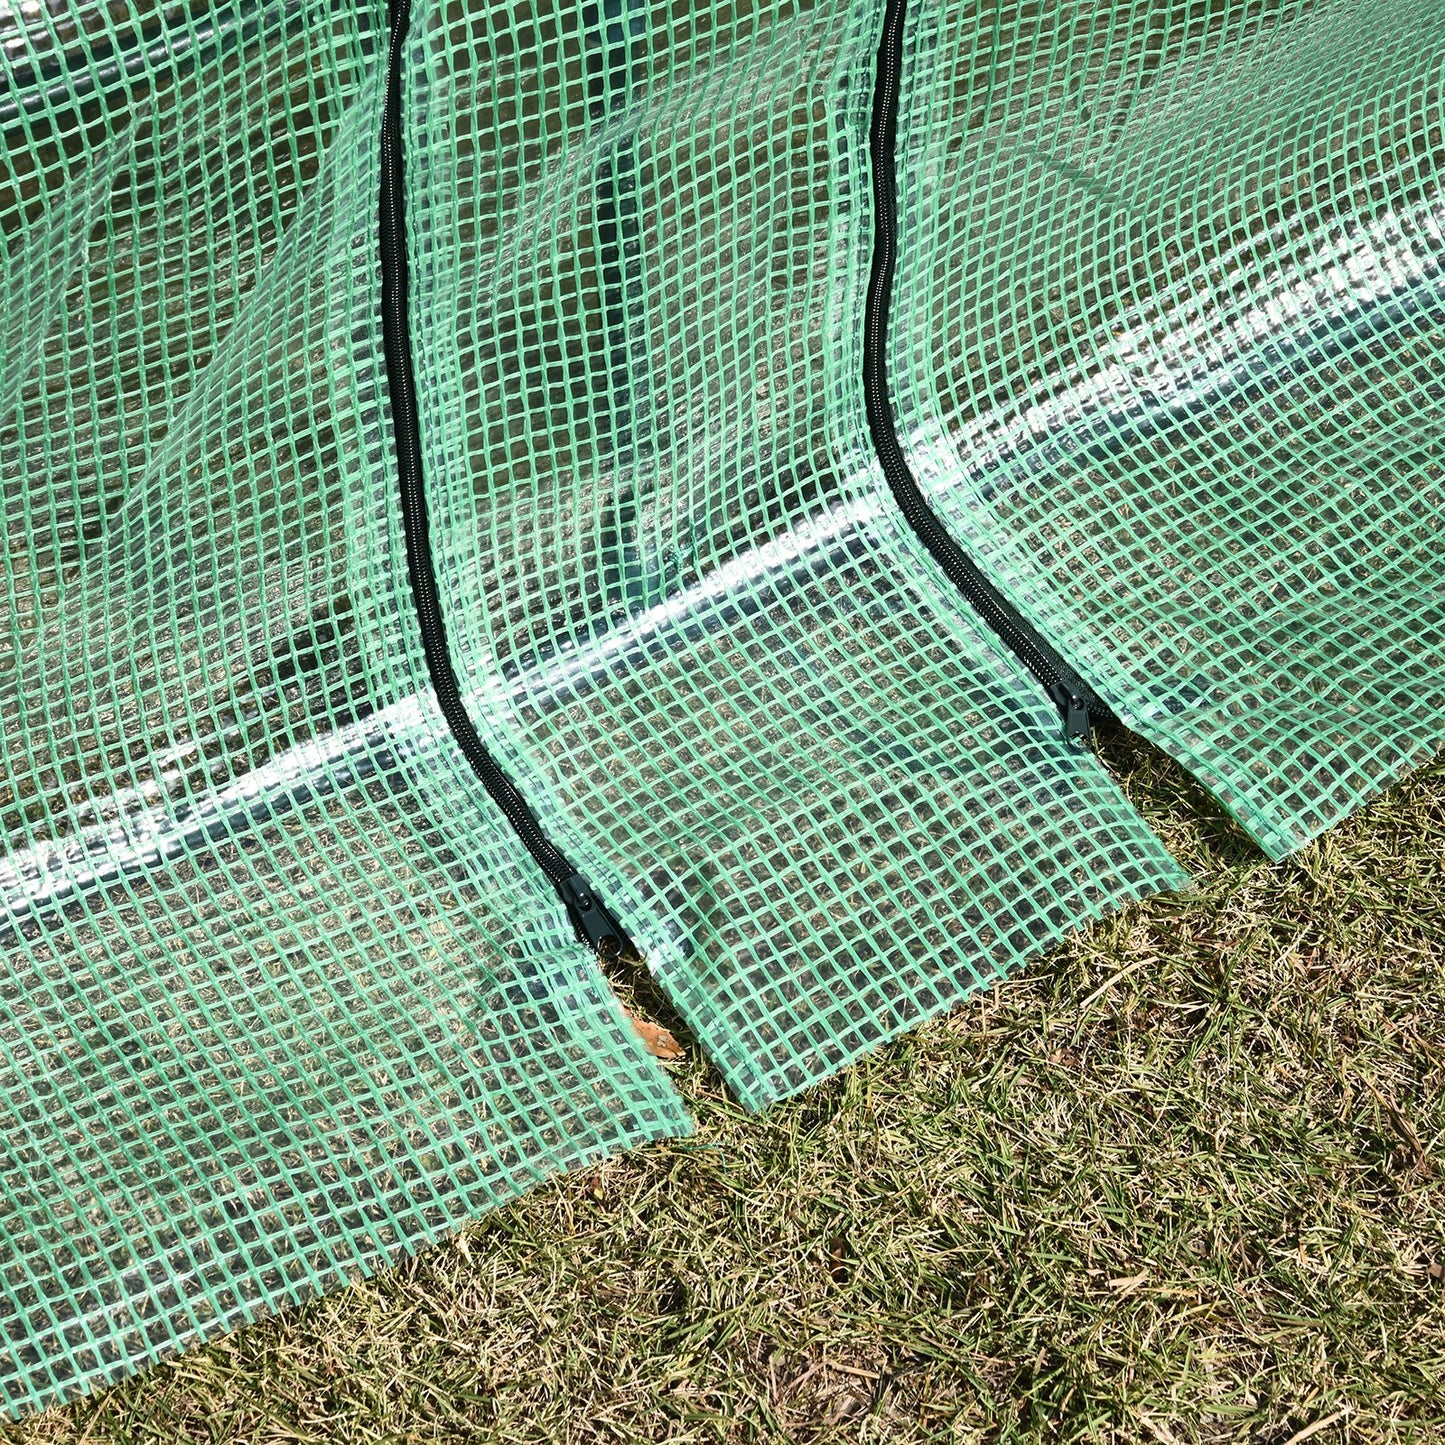 Outsunny 180x90x90cm Mini PE Grid Cover Steel Frame Greenhouse Green